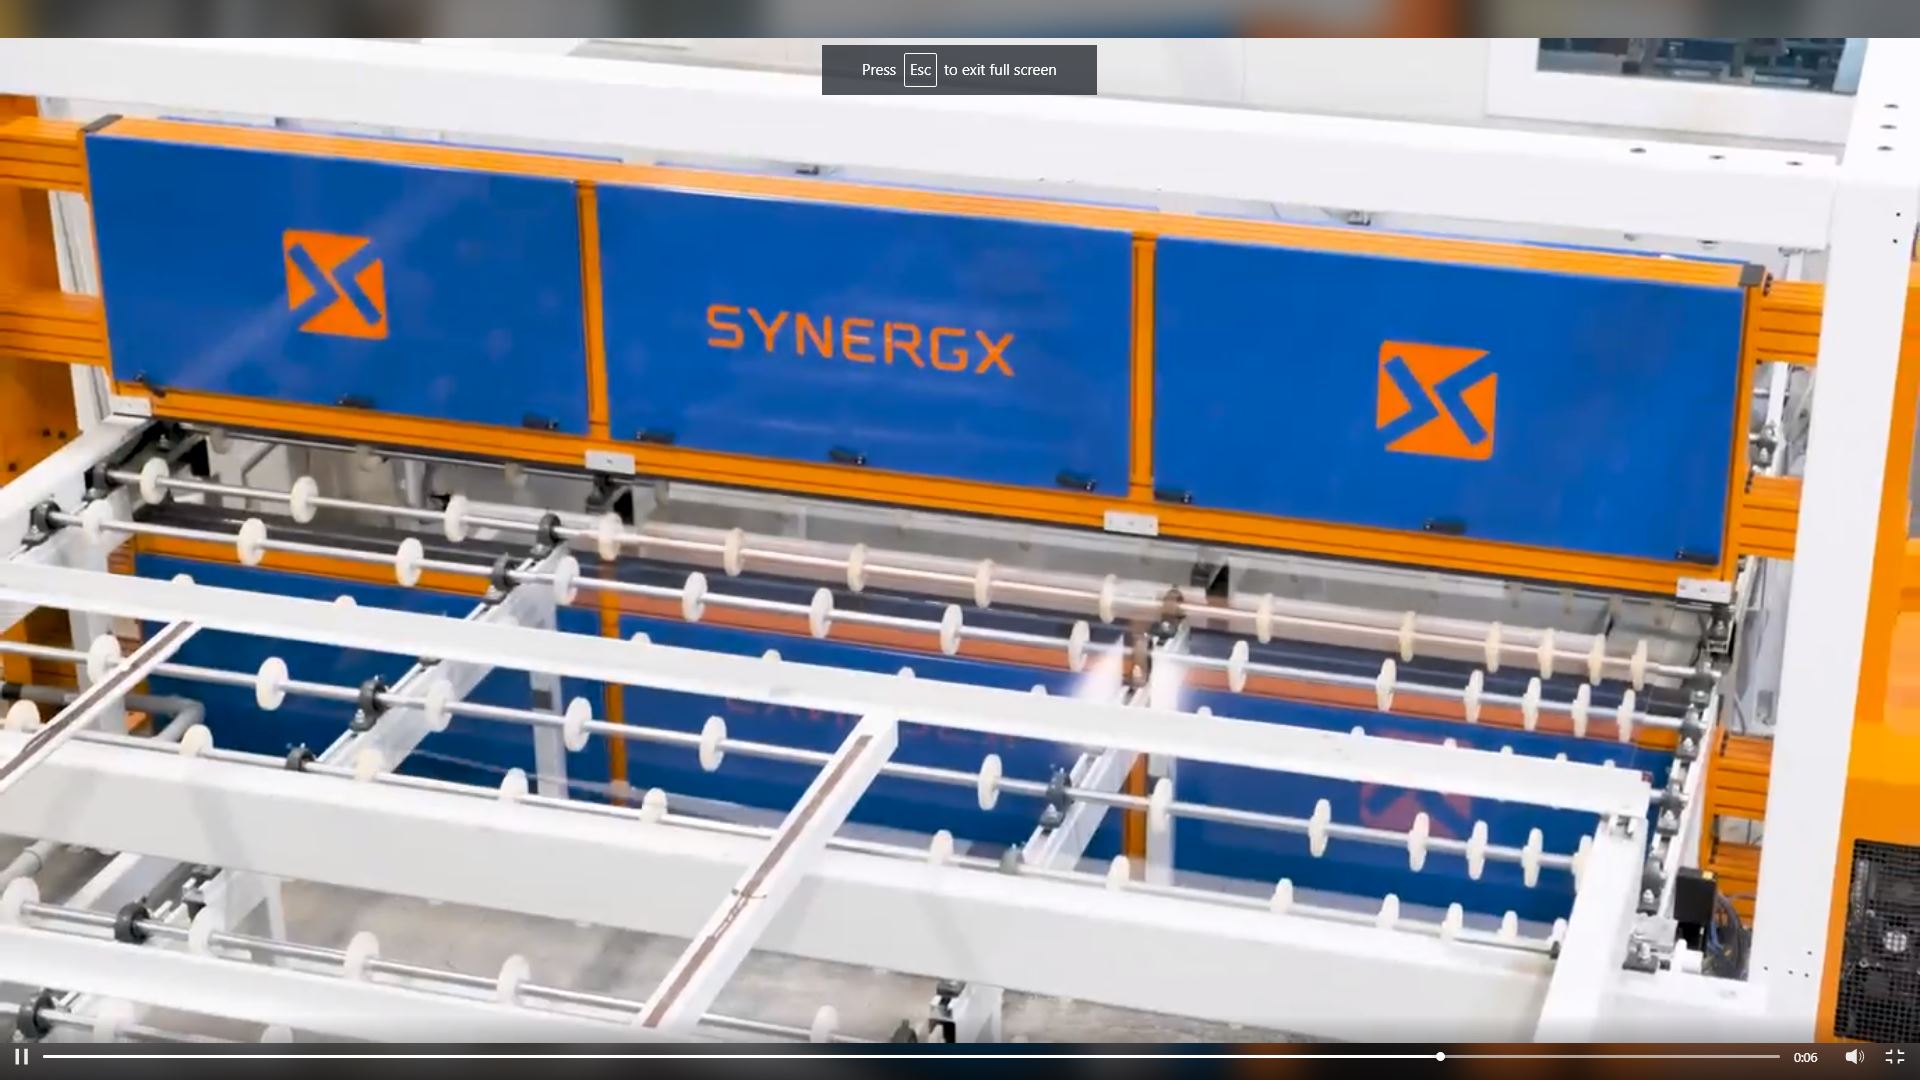 Synergx Scanner is installed at AGNORA